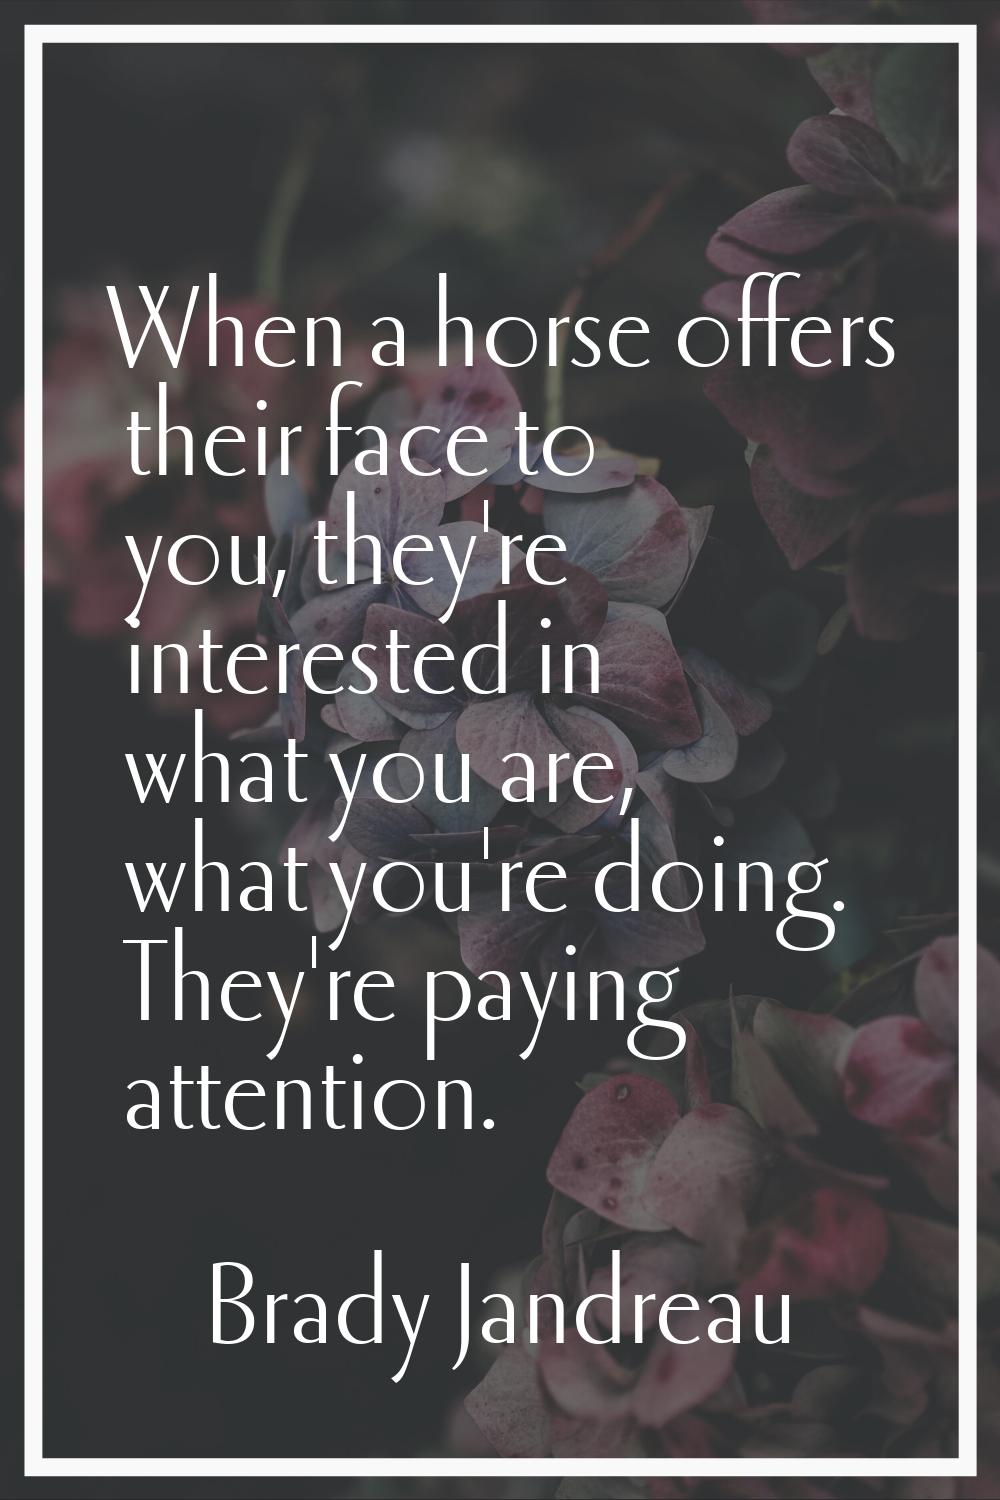 When a horse offers their face to you, they're interested in what you are, what you're doing. They'